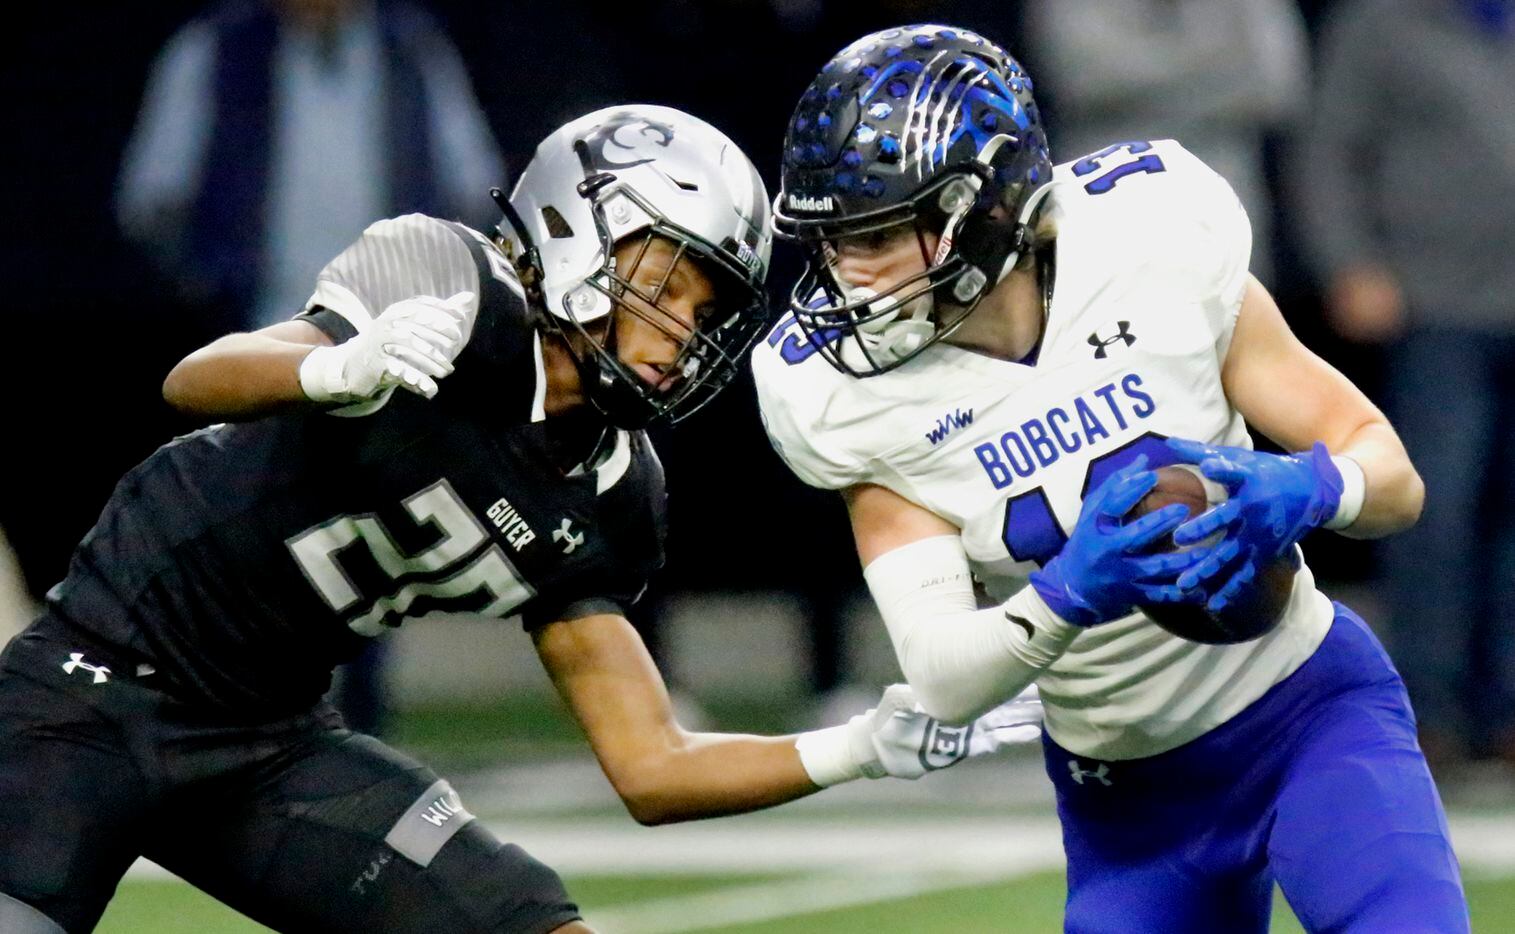 Byron Nelson High School wide receiver Gavin Mccurley (13) makes a catch in front of Guyer High School free safety Brenden Bradshaw (20) during the first half as Denton Guyer High School played Trophy Club Byron Nelson High School in a Class 6A Division II Region I semifinal football game at The Ford Center in Frisco on Saturday, November 27, 2021. (Stewart F. House/Special Contributor)